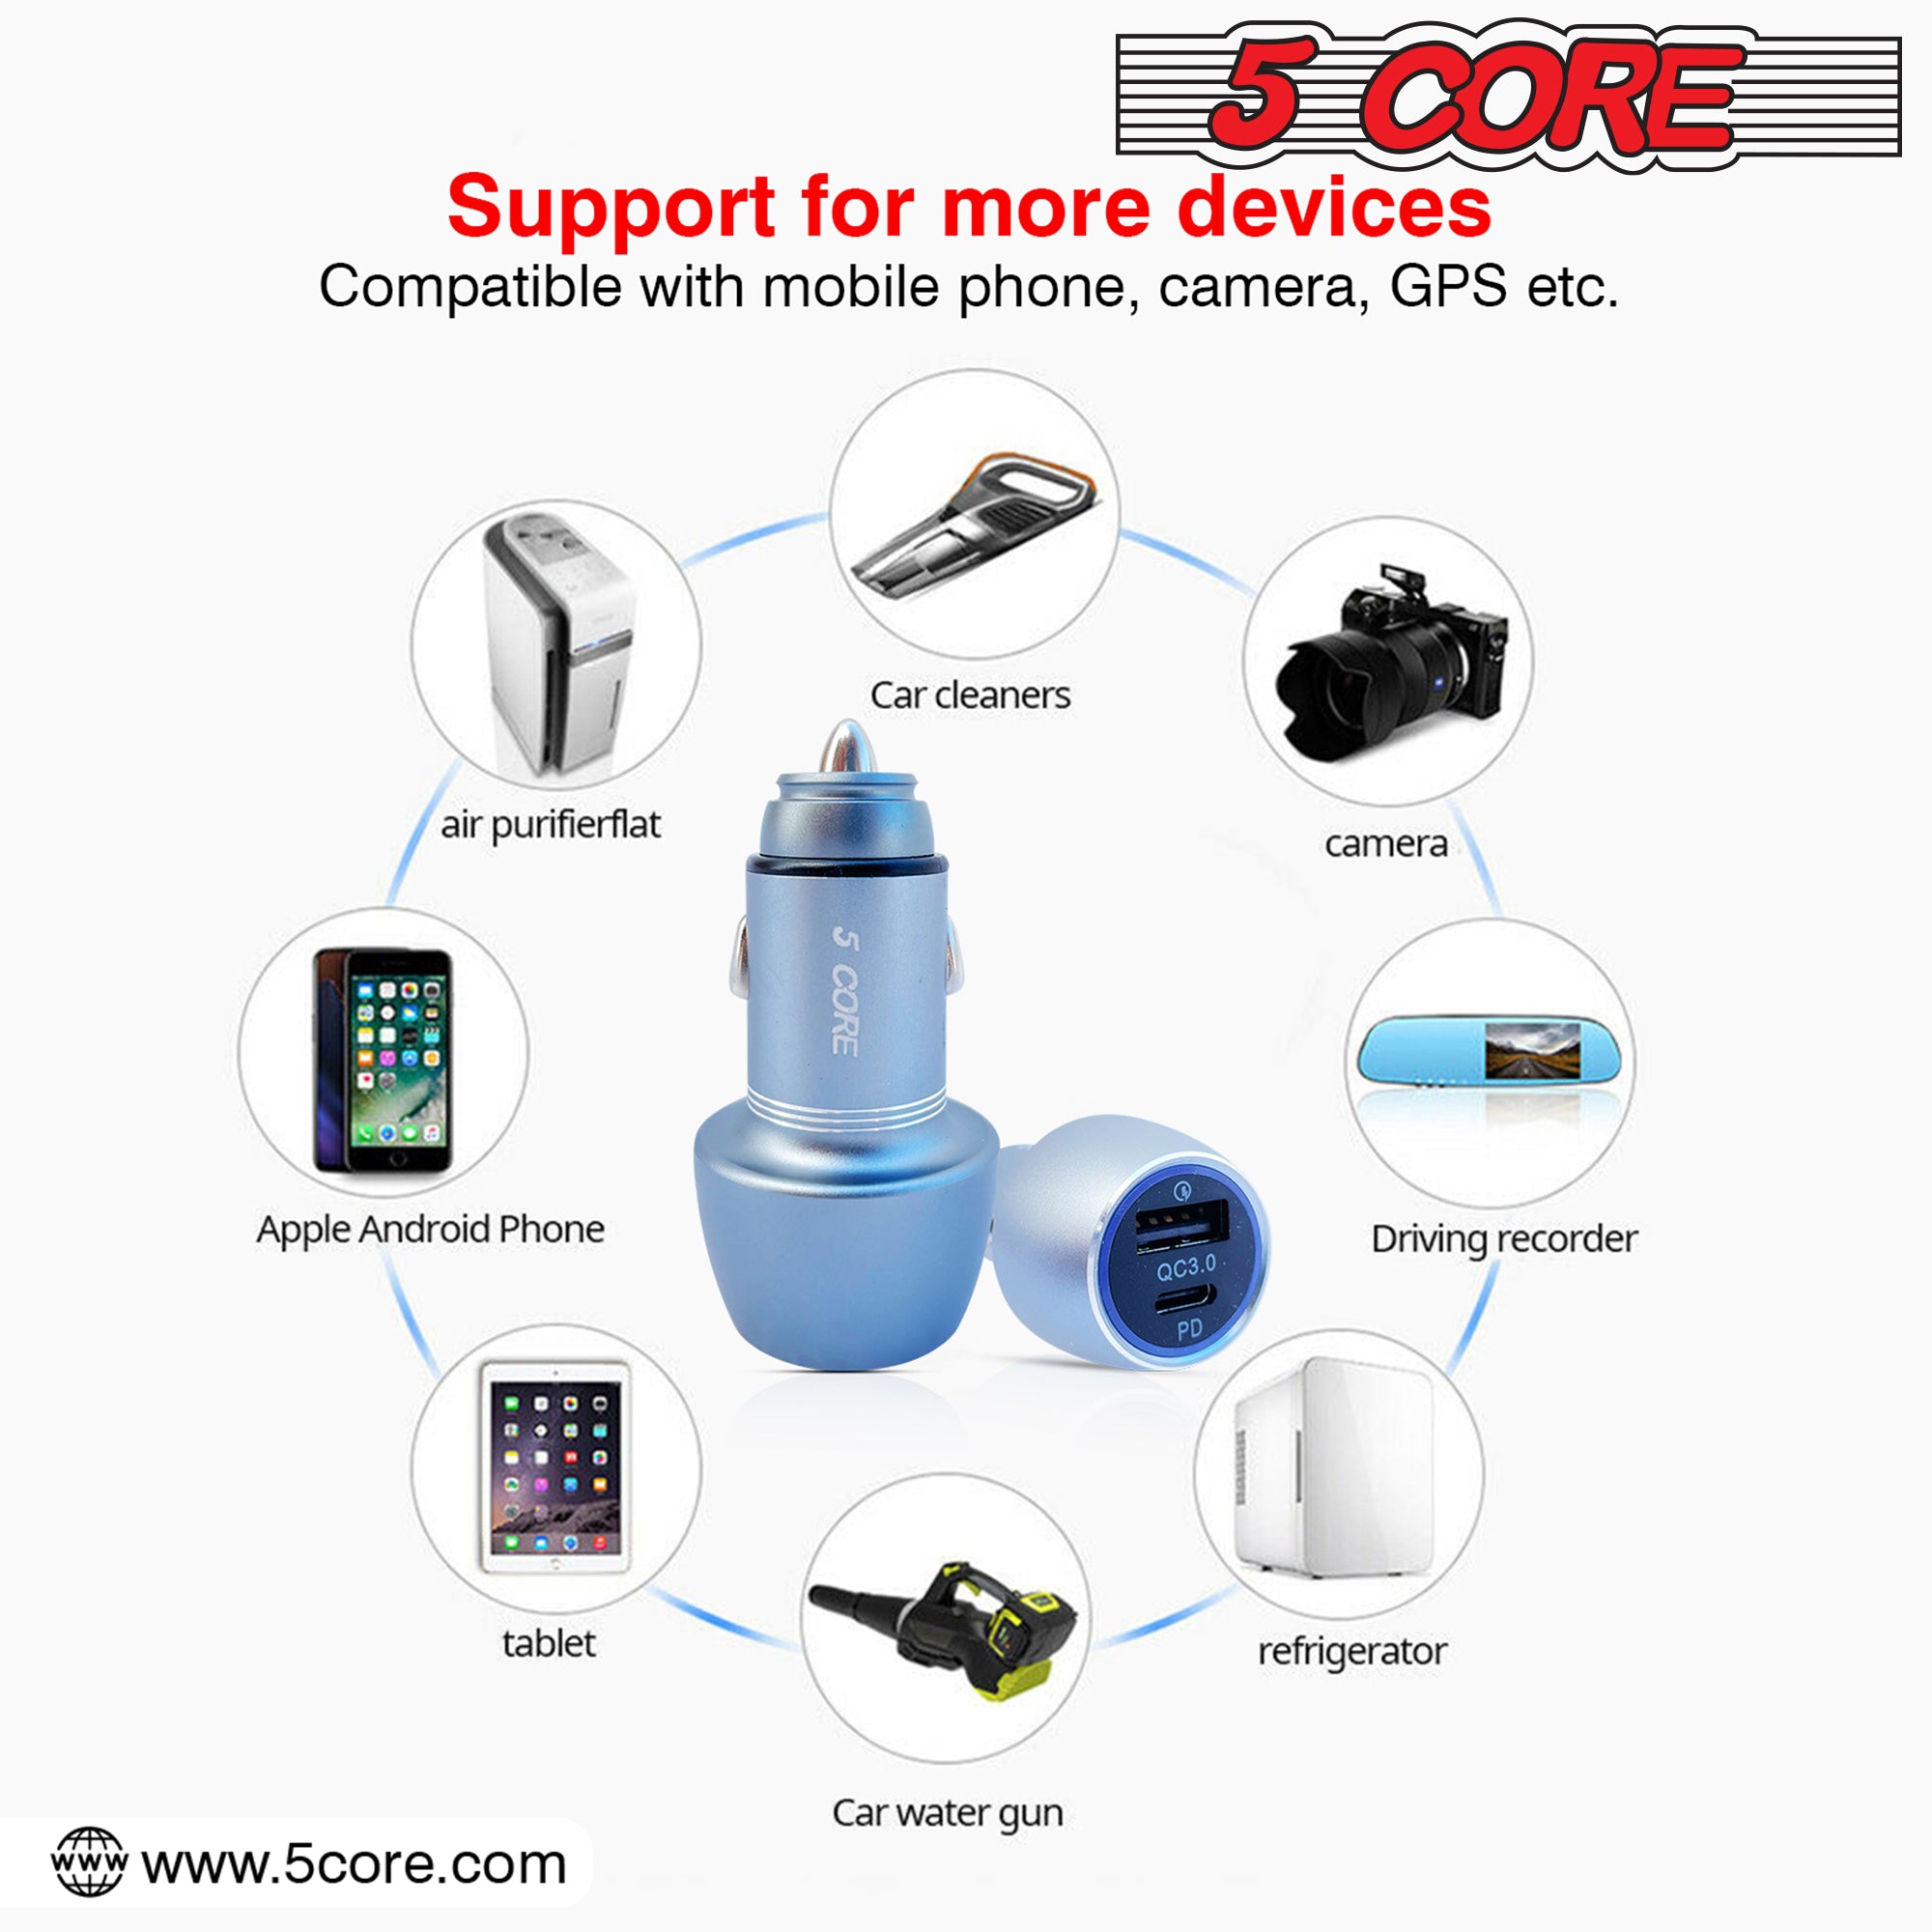 5 Core Car Charger Mini Aluminum Alloy Dual USB Power Adapter with PD QC 3.0 Port Soft LED Fast Charging for iPhone Samsung -CDKC12 2Pcs